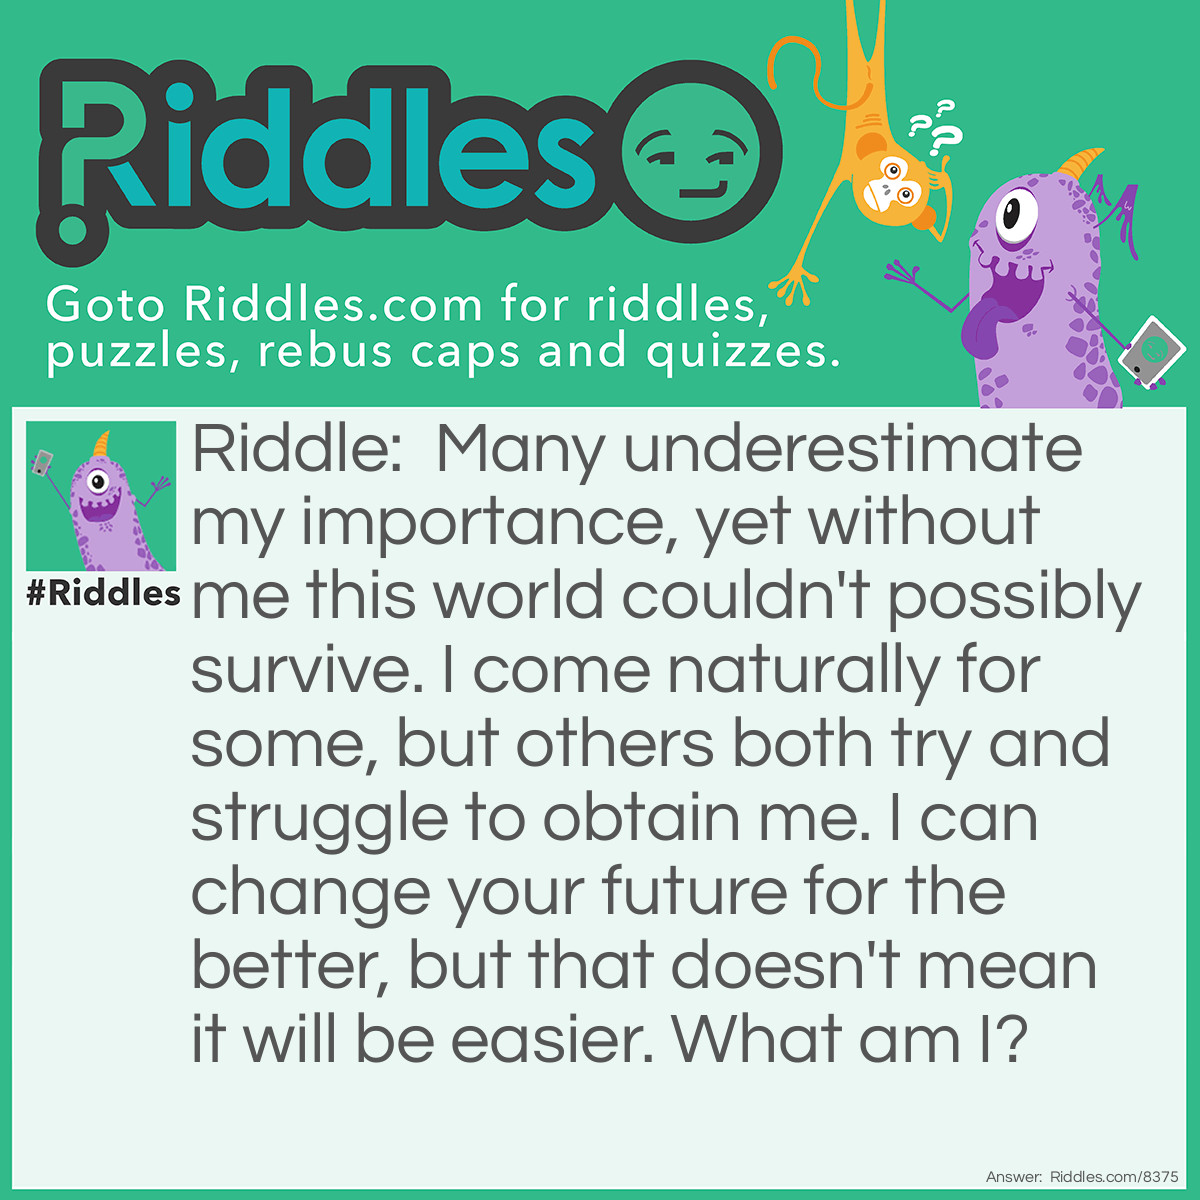 Riddle: Many underestimate my importance, yet without me this world couldn't possibly survive. I come naturally for some, but others both try and struggle to obtain me. I can change your future for the better, but that doesn't mean it will be easier. What am I? Answer: Knowledge.